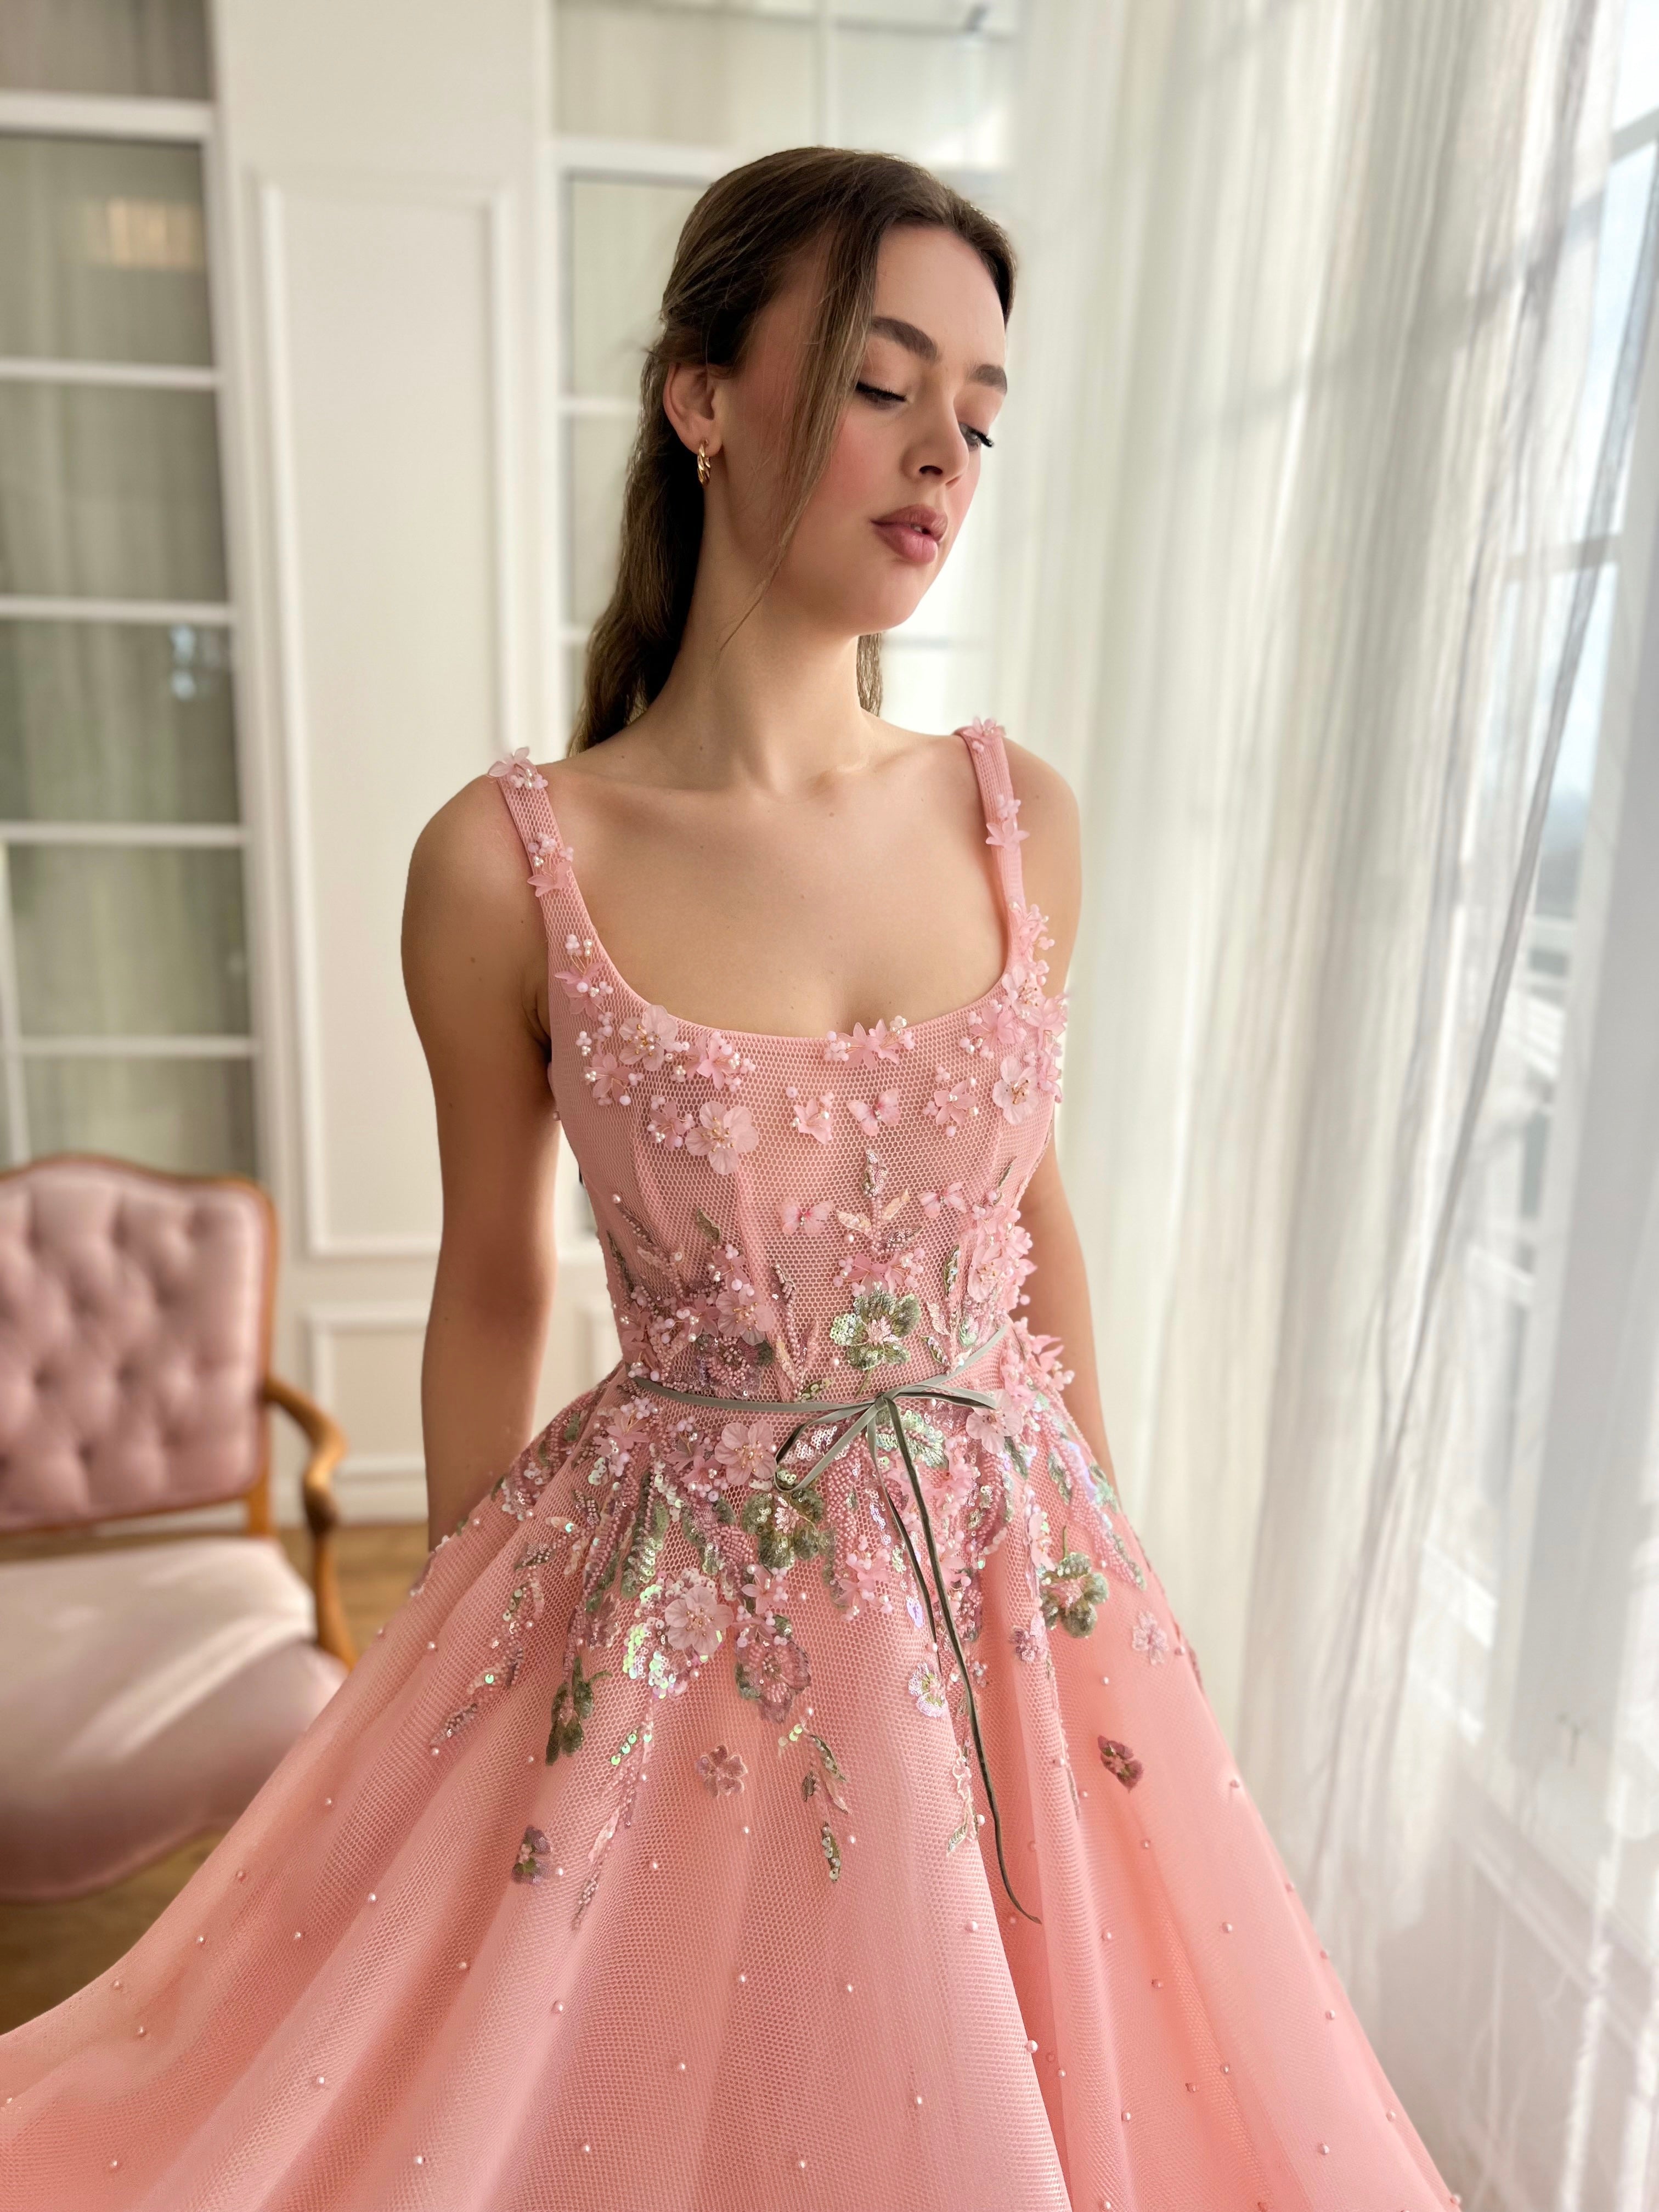 Pink A-Line dress with embroidery, beading and straps